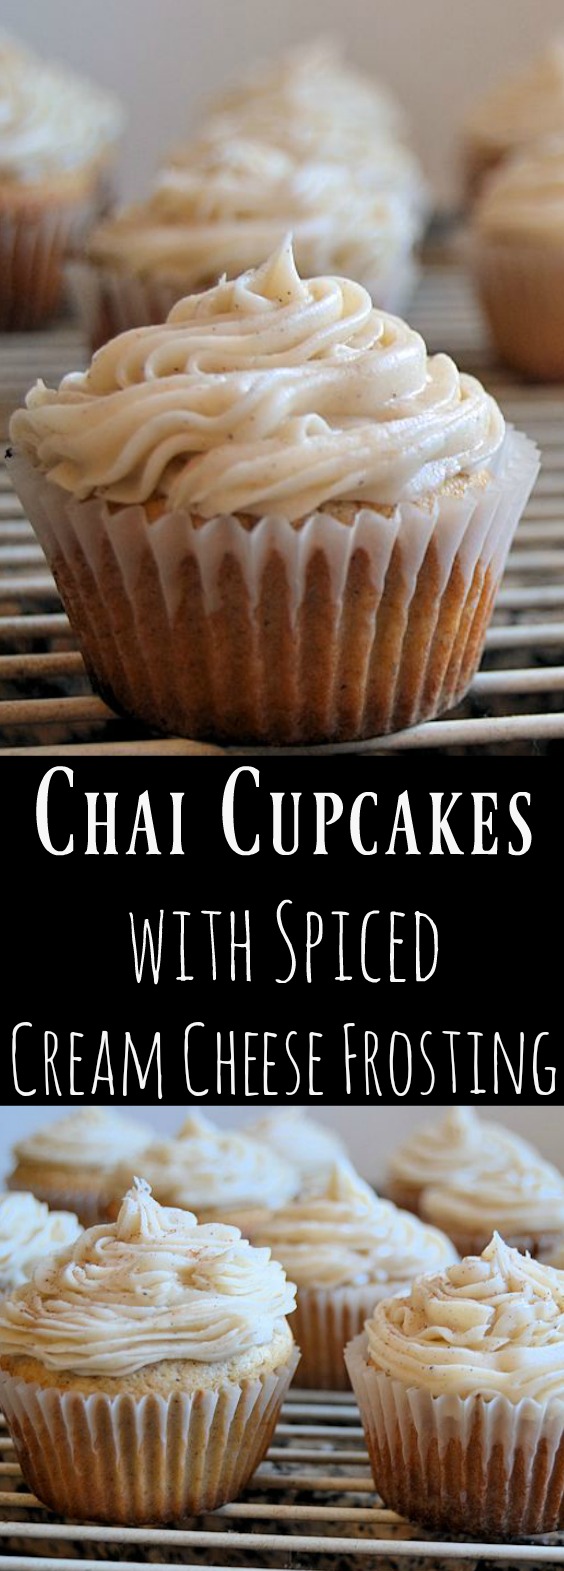 Chai Cupcakes with Spiced Cream Cheese Frosting